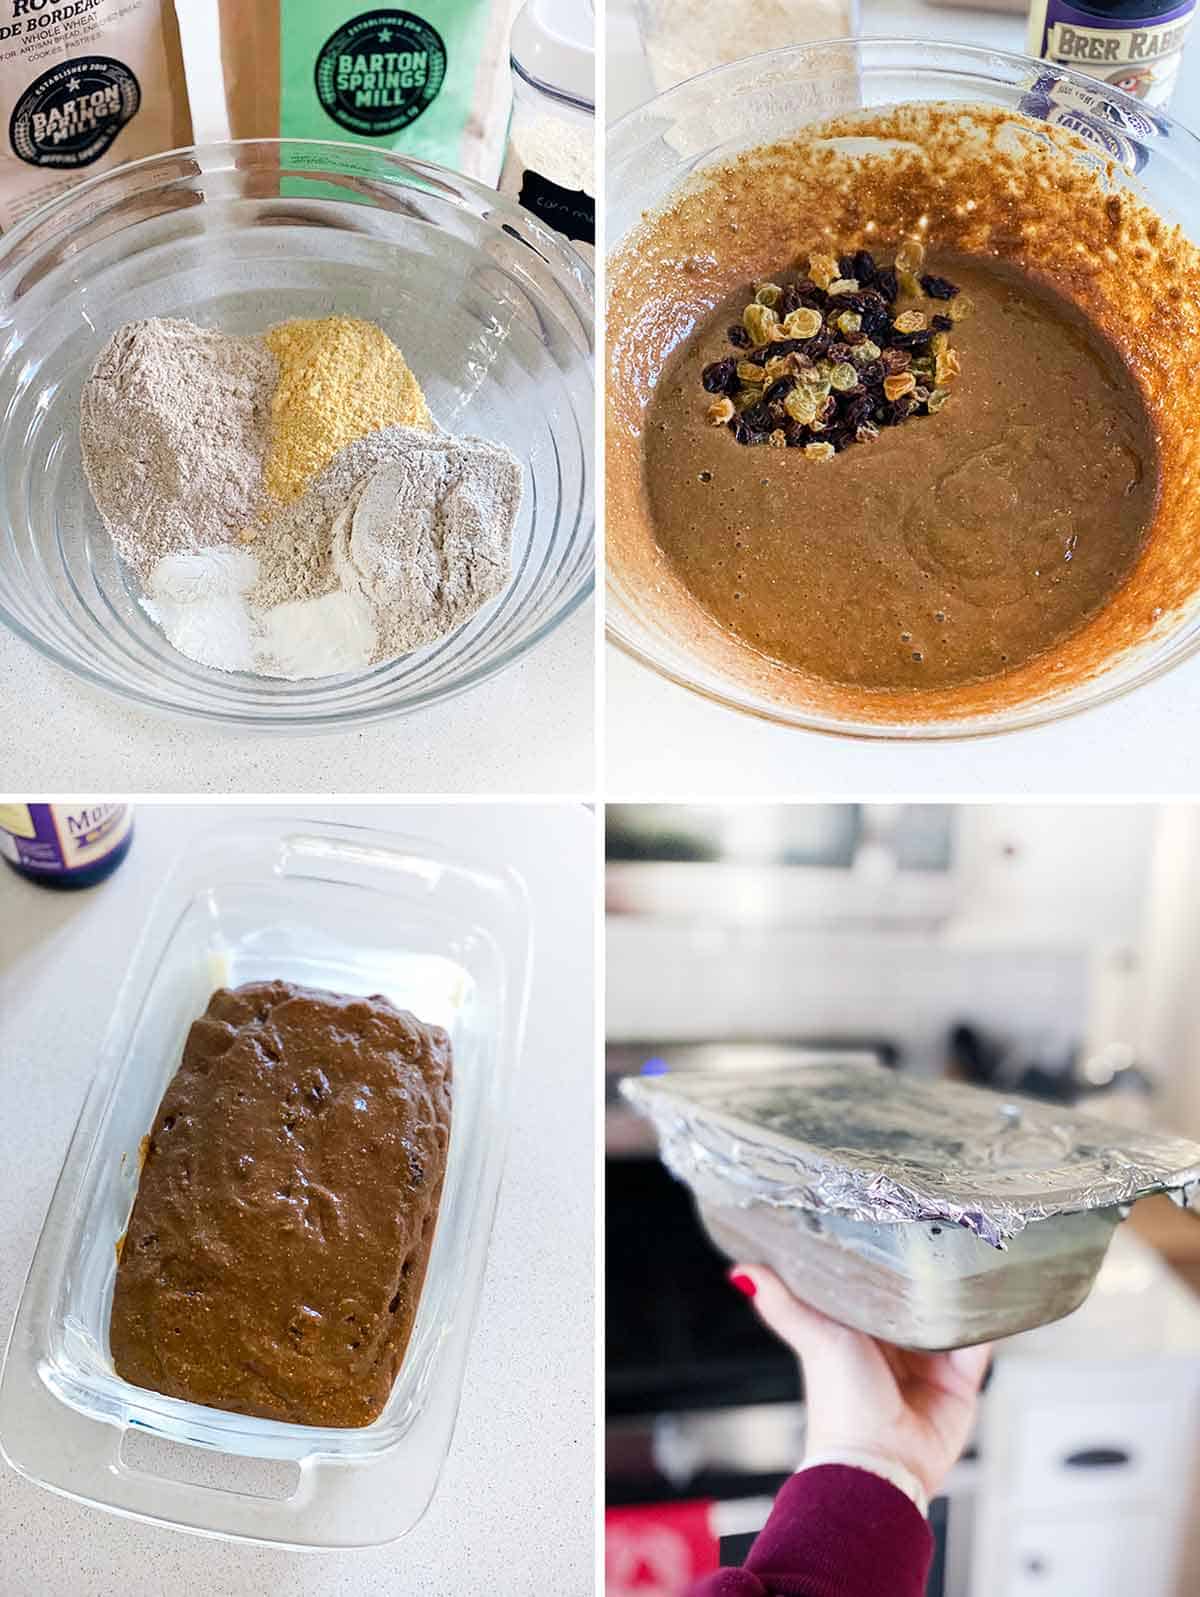 Process collage showing how to mix the batter for New England brown bread and seal with foil to steam.